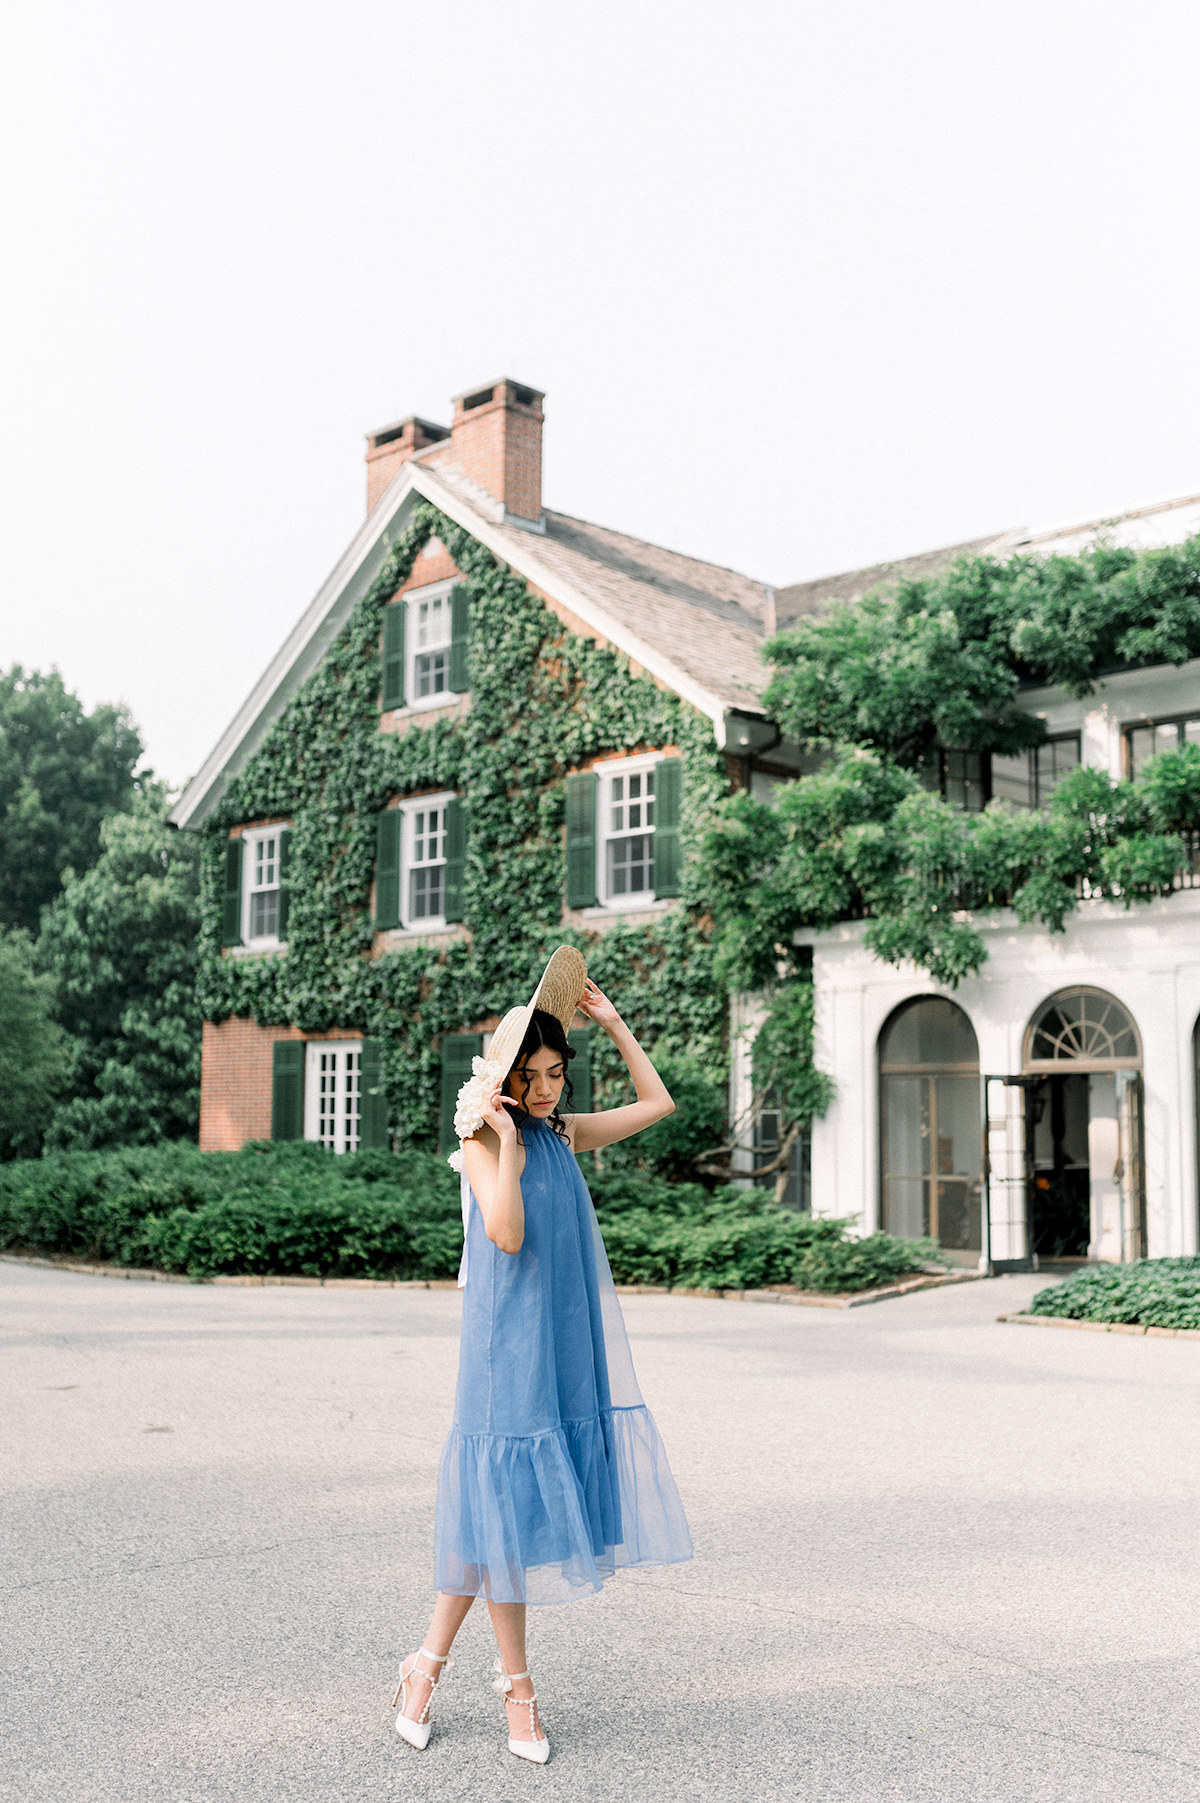 In her Anthropologie French blue gown and a hat adorned with delicate white hydrangeas, Karla adds a touch of vintage charm to the scene as she poses gracefully in front of a historical house at Longwood Gardens.